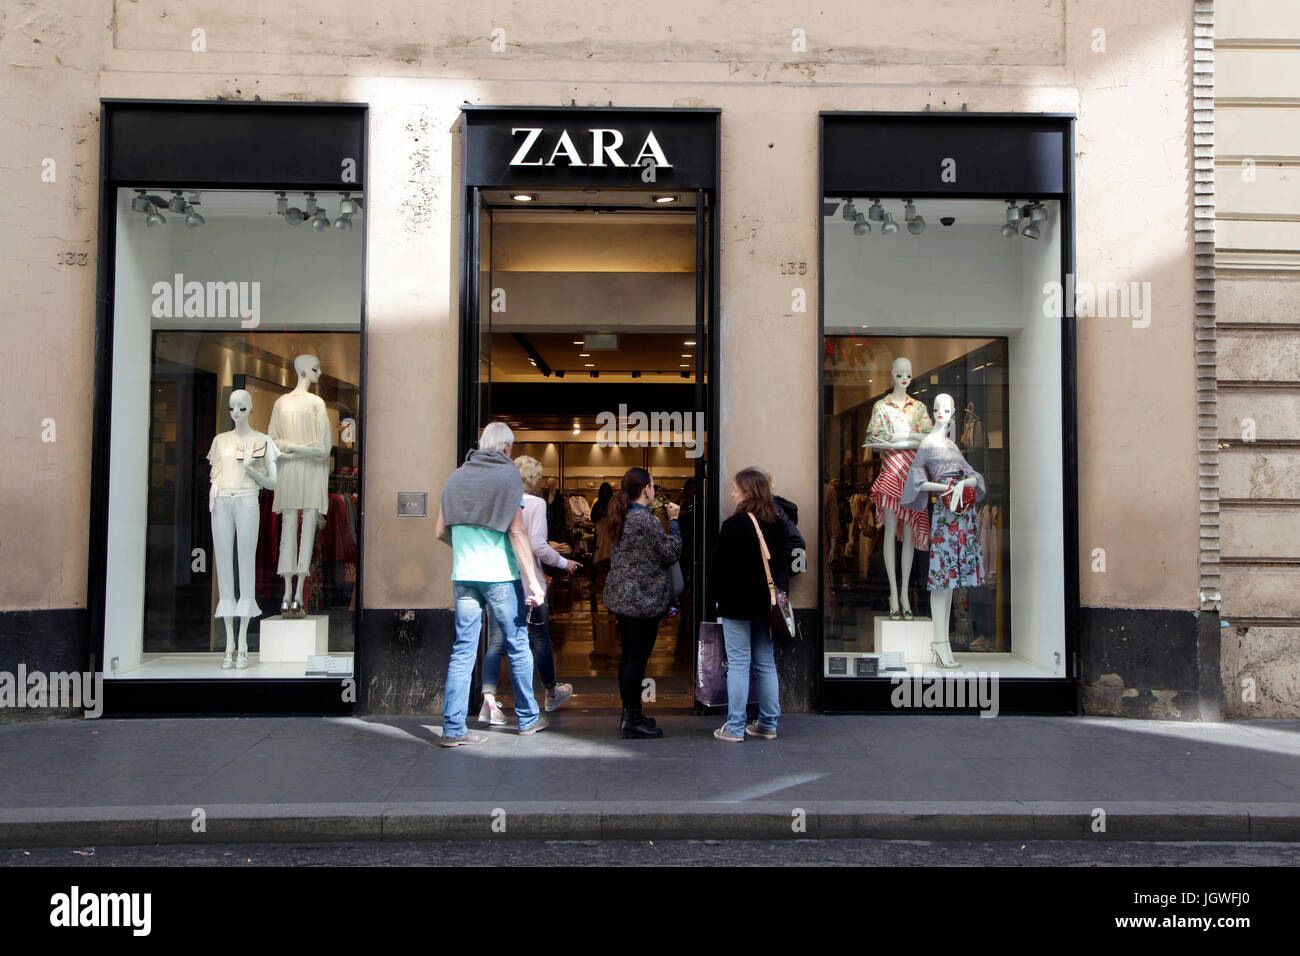 Page 8 - Zara Logo High Resolution Stock Photography and Images - Alamy